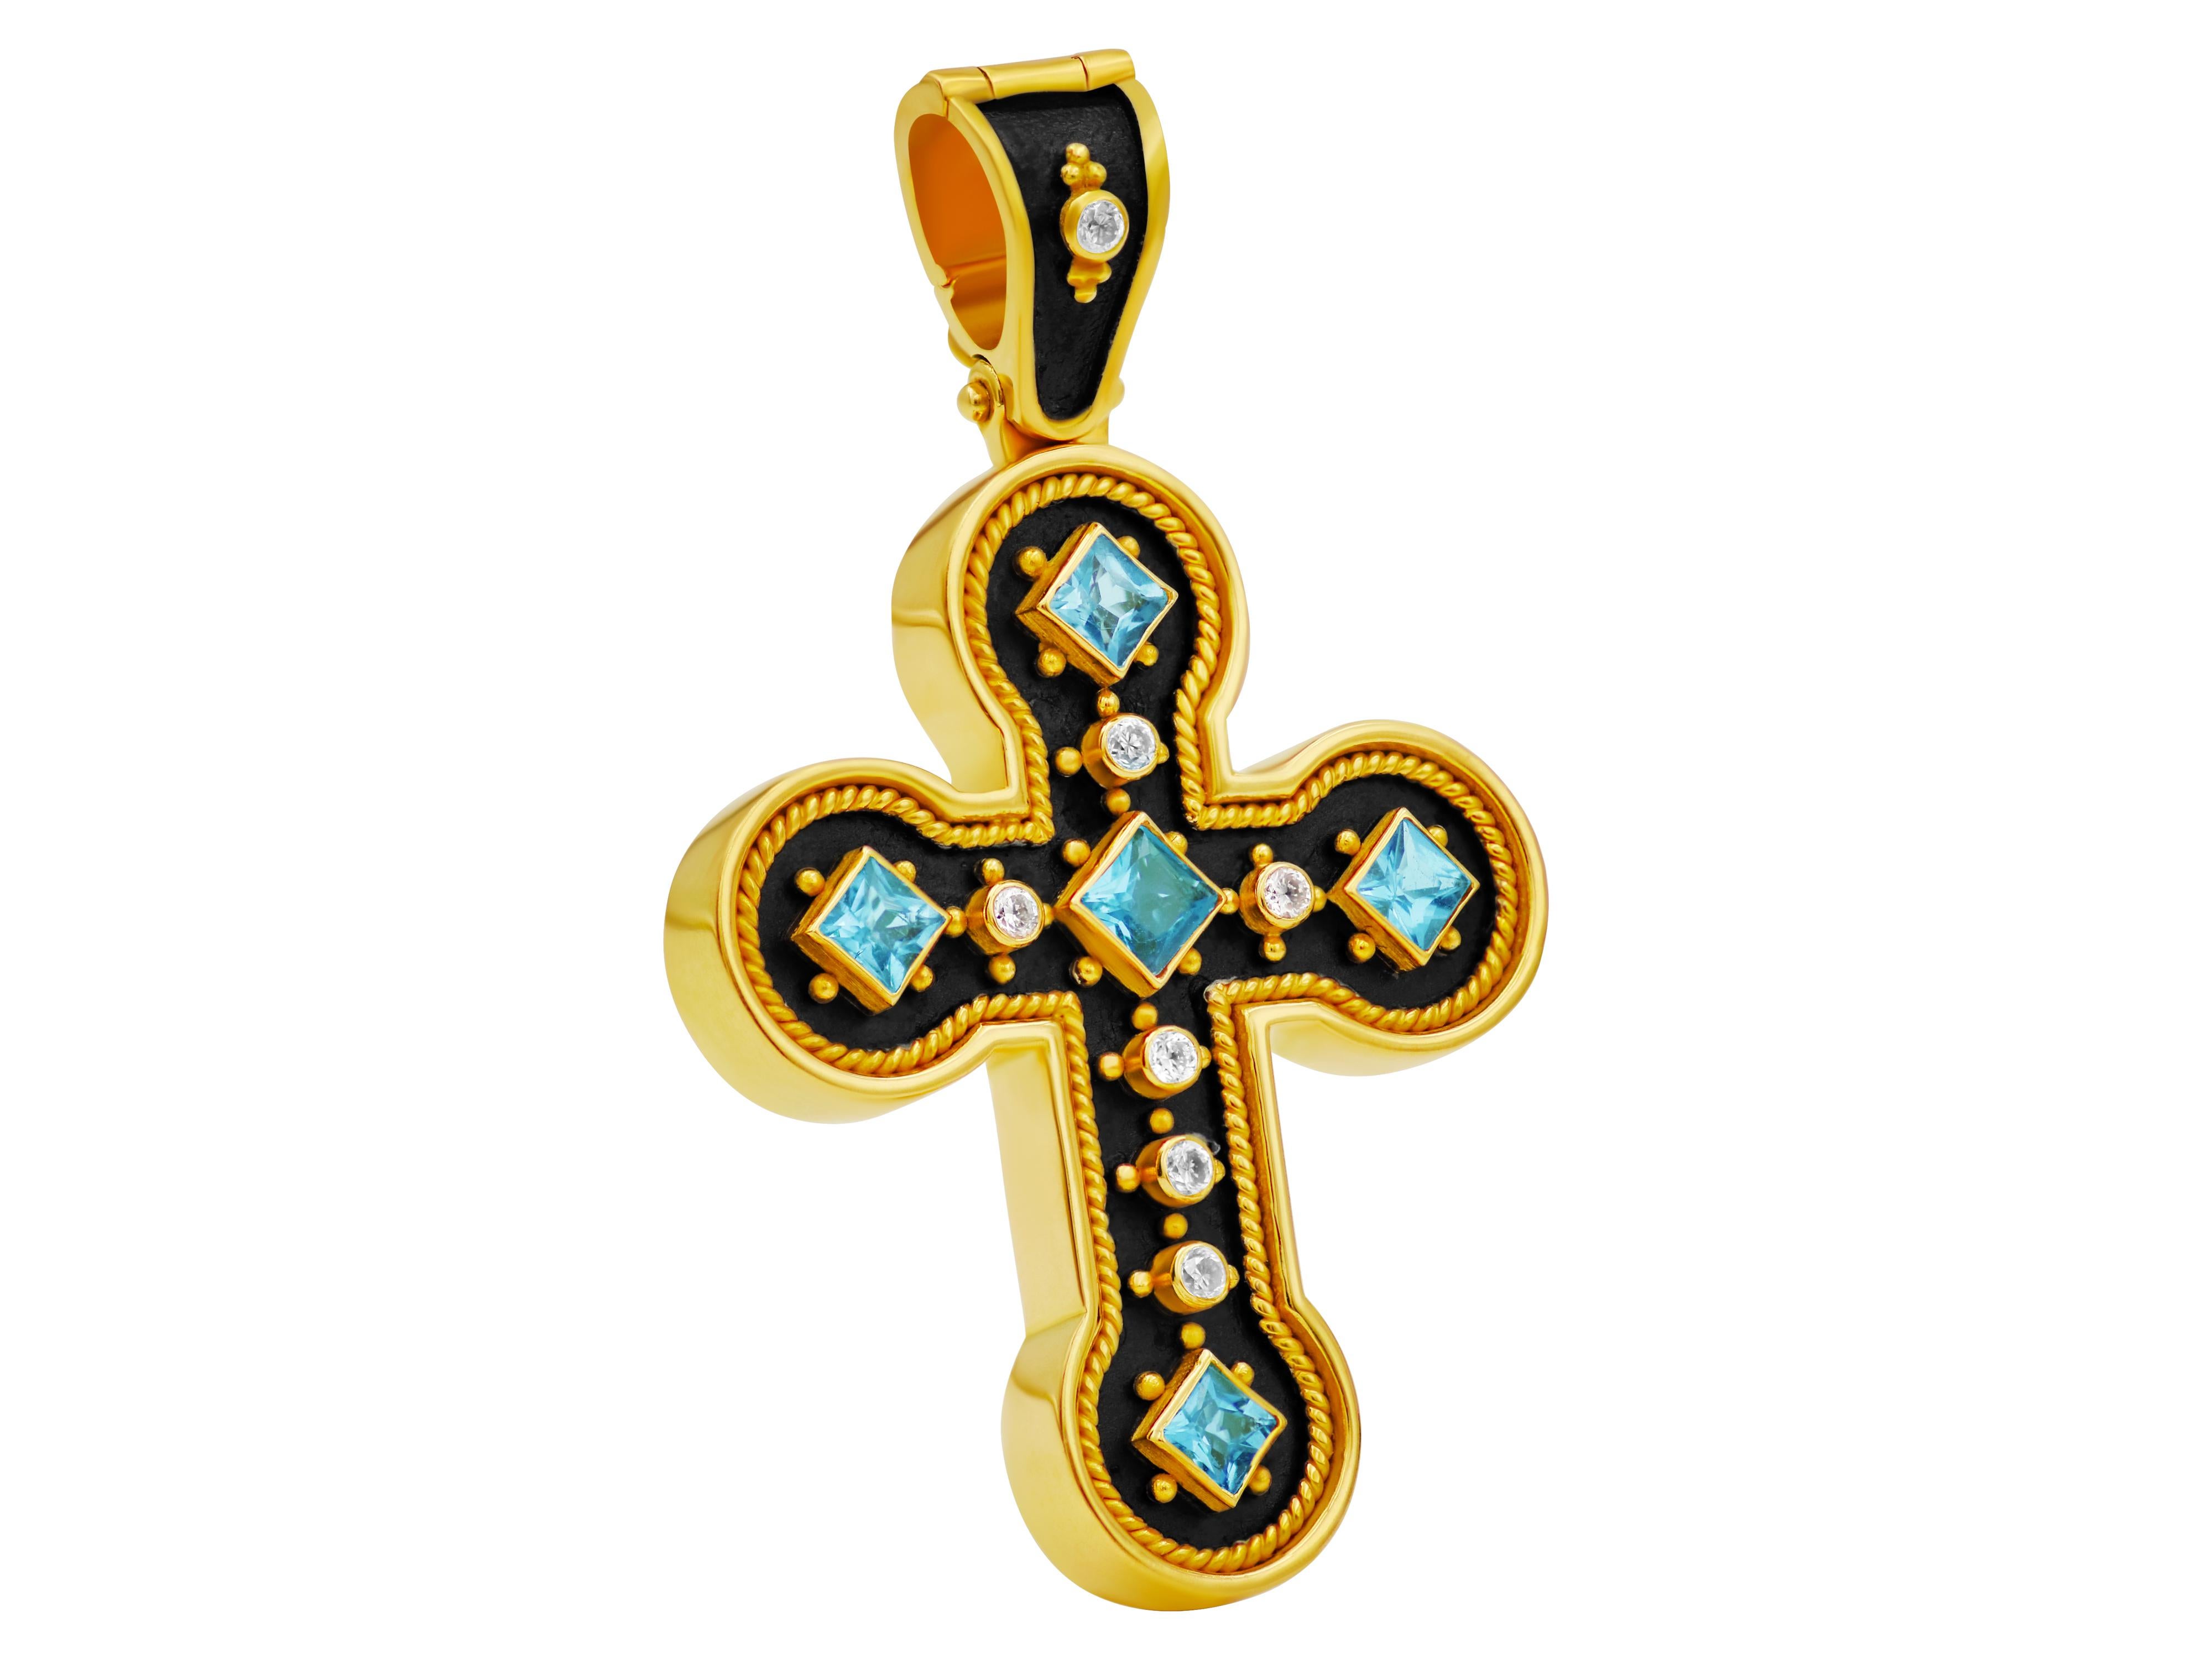 18k yellow gold cross from the Noir collection and this one apart of the seven 0.14 carats very white diamonds it set with five 0.65 carats princess cuts aquamarines. Filigrees and granulation show the high level of work. Make sure you see the back